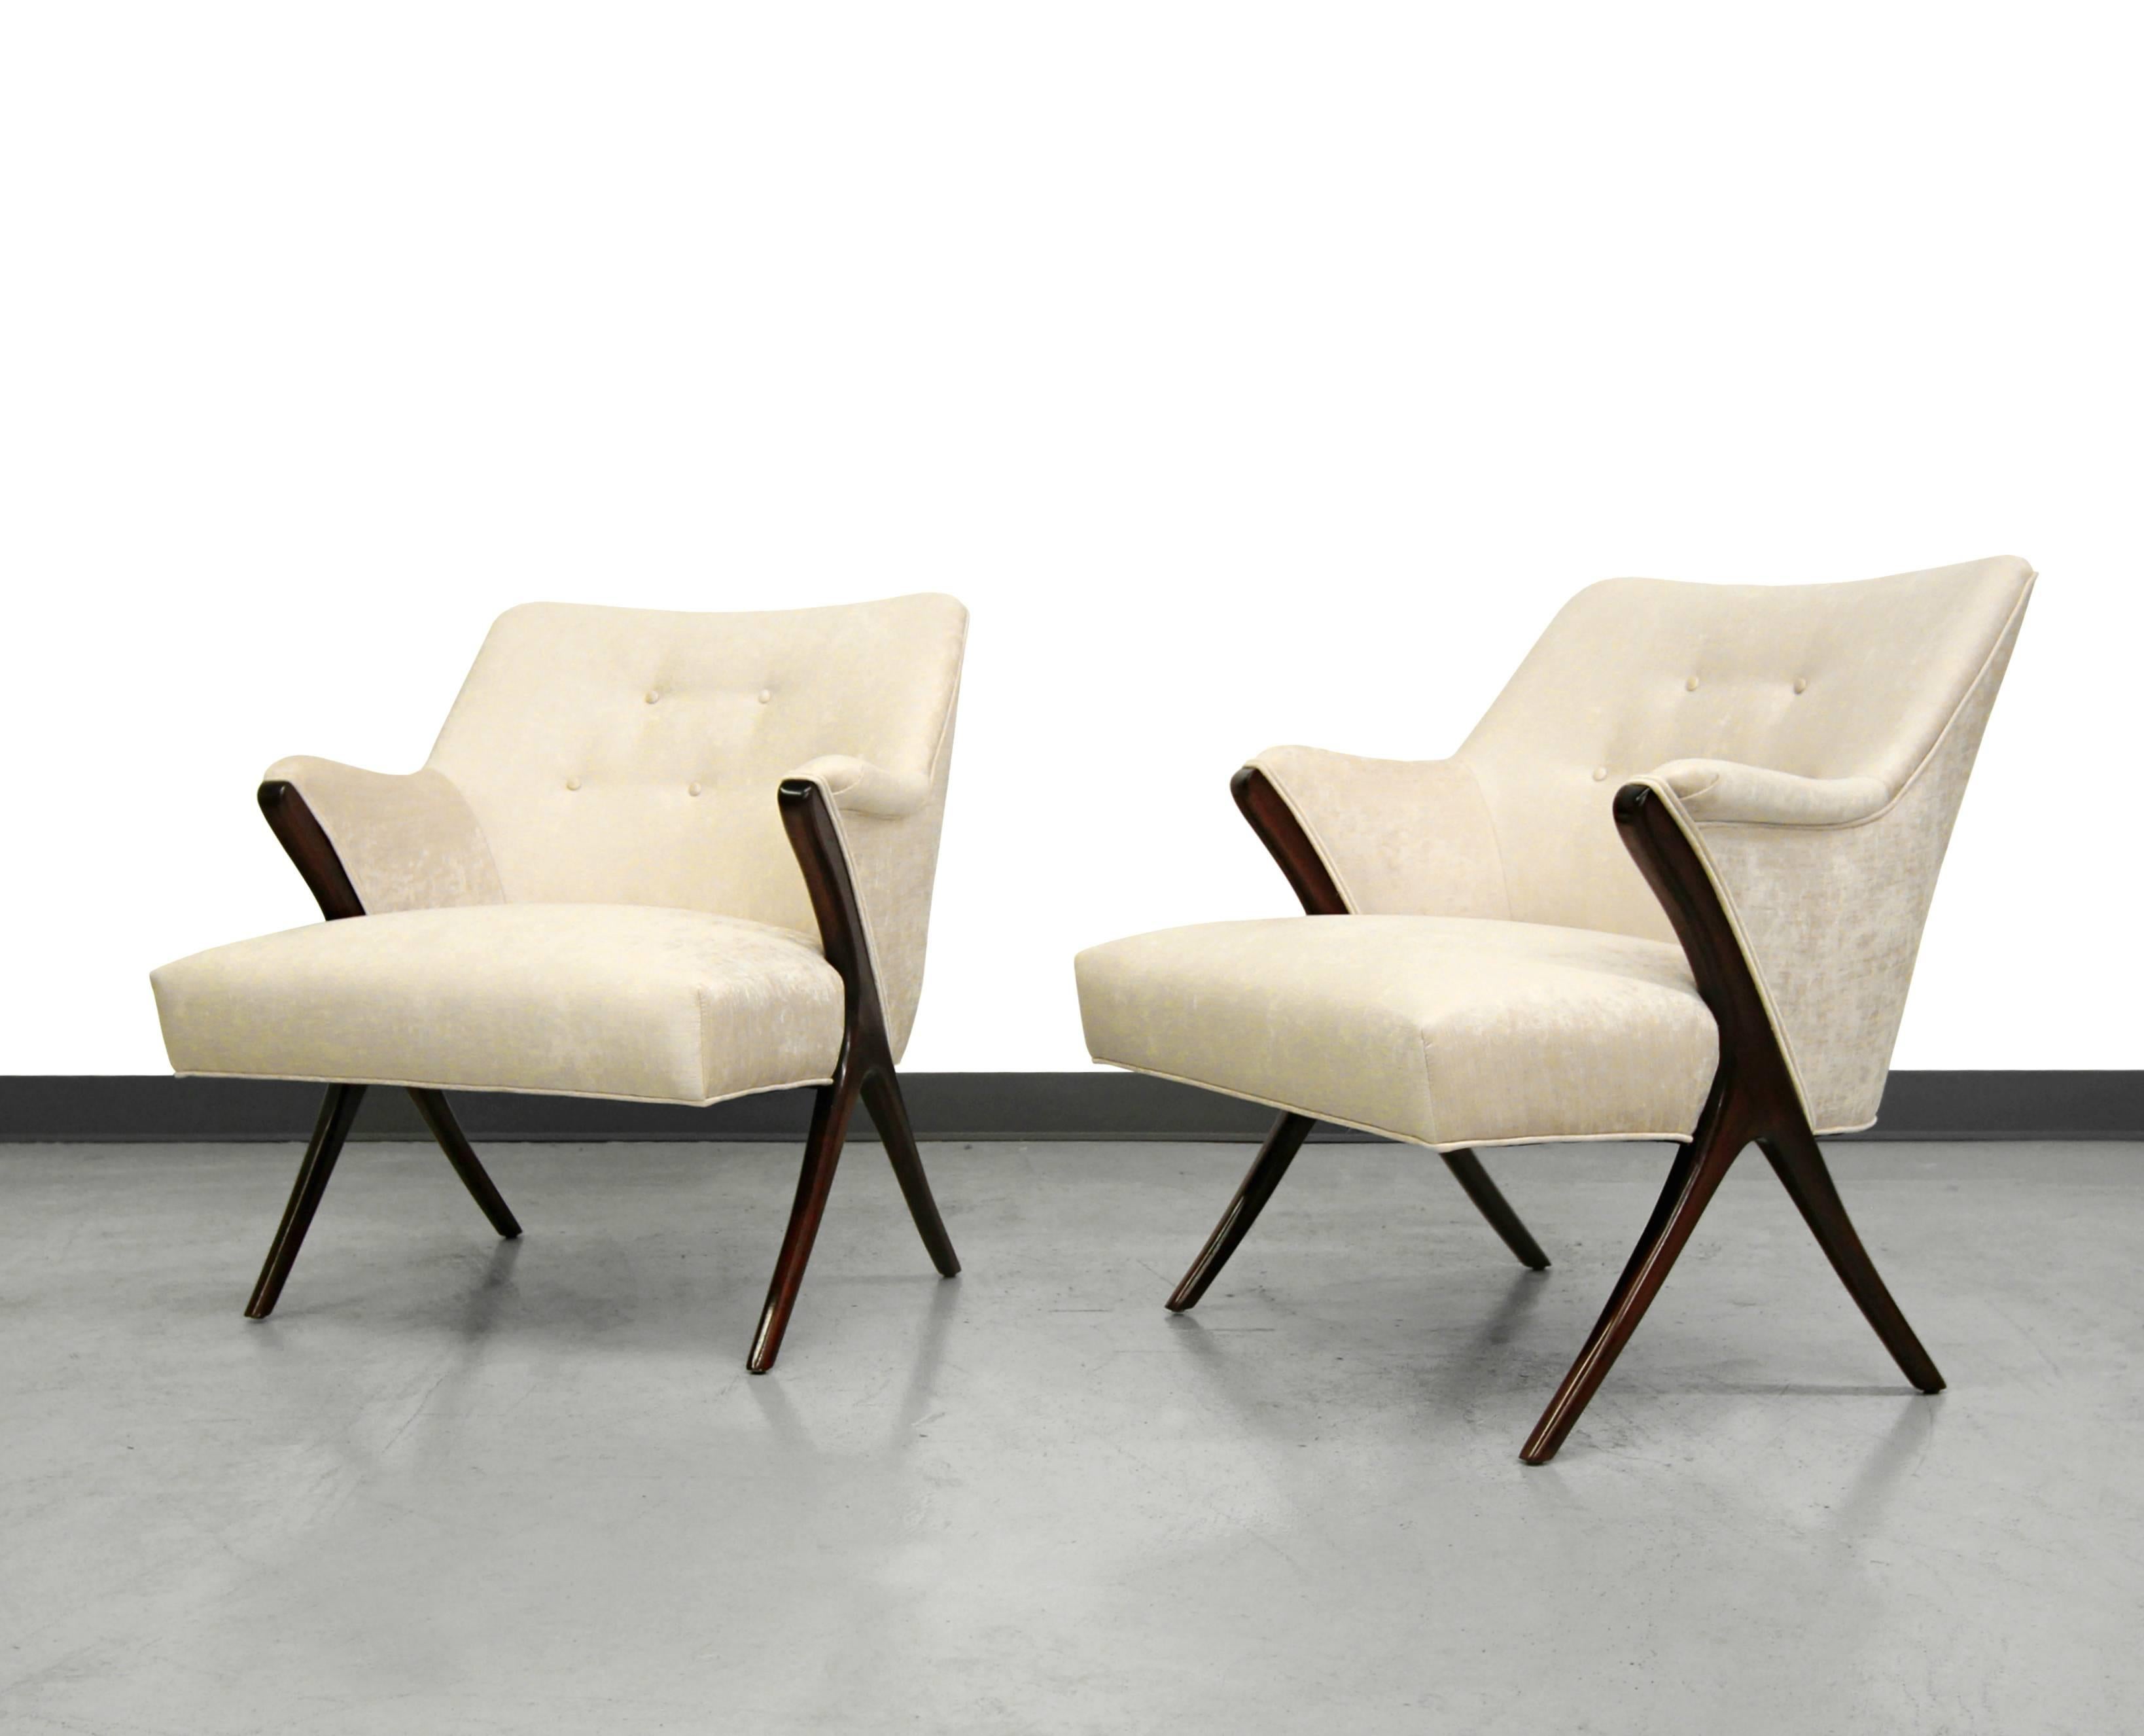 This exquisite pair of Mid-Century scissor lounge chairs in the style of Karpen of California are true design masterpieces. Beautiful lines coupled with sculptural frames make these beauties the perfect fit in most any decor. The cream colored